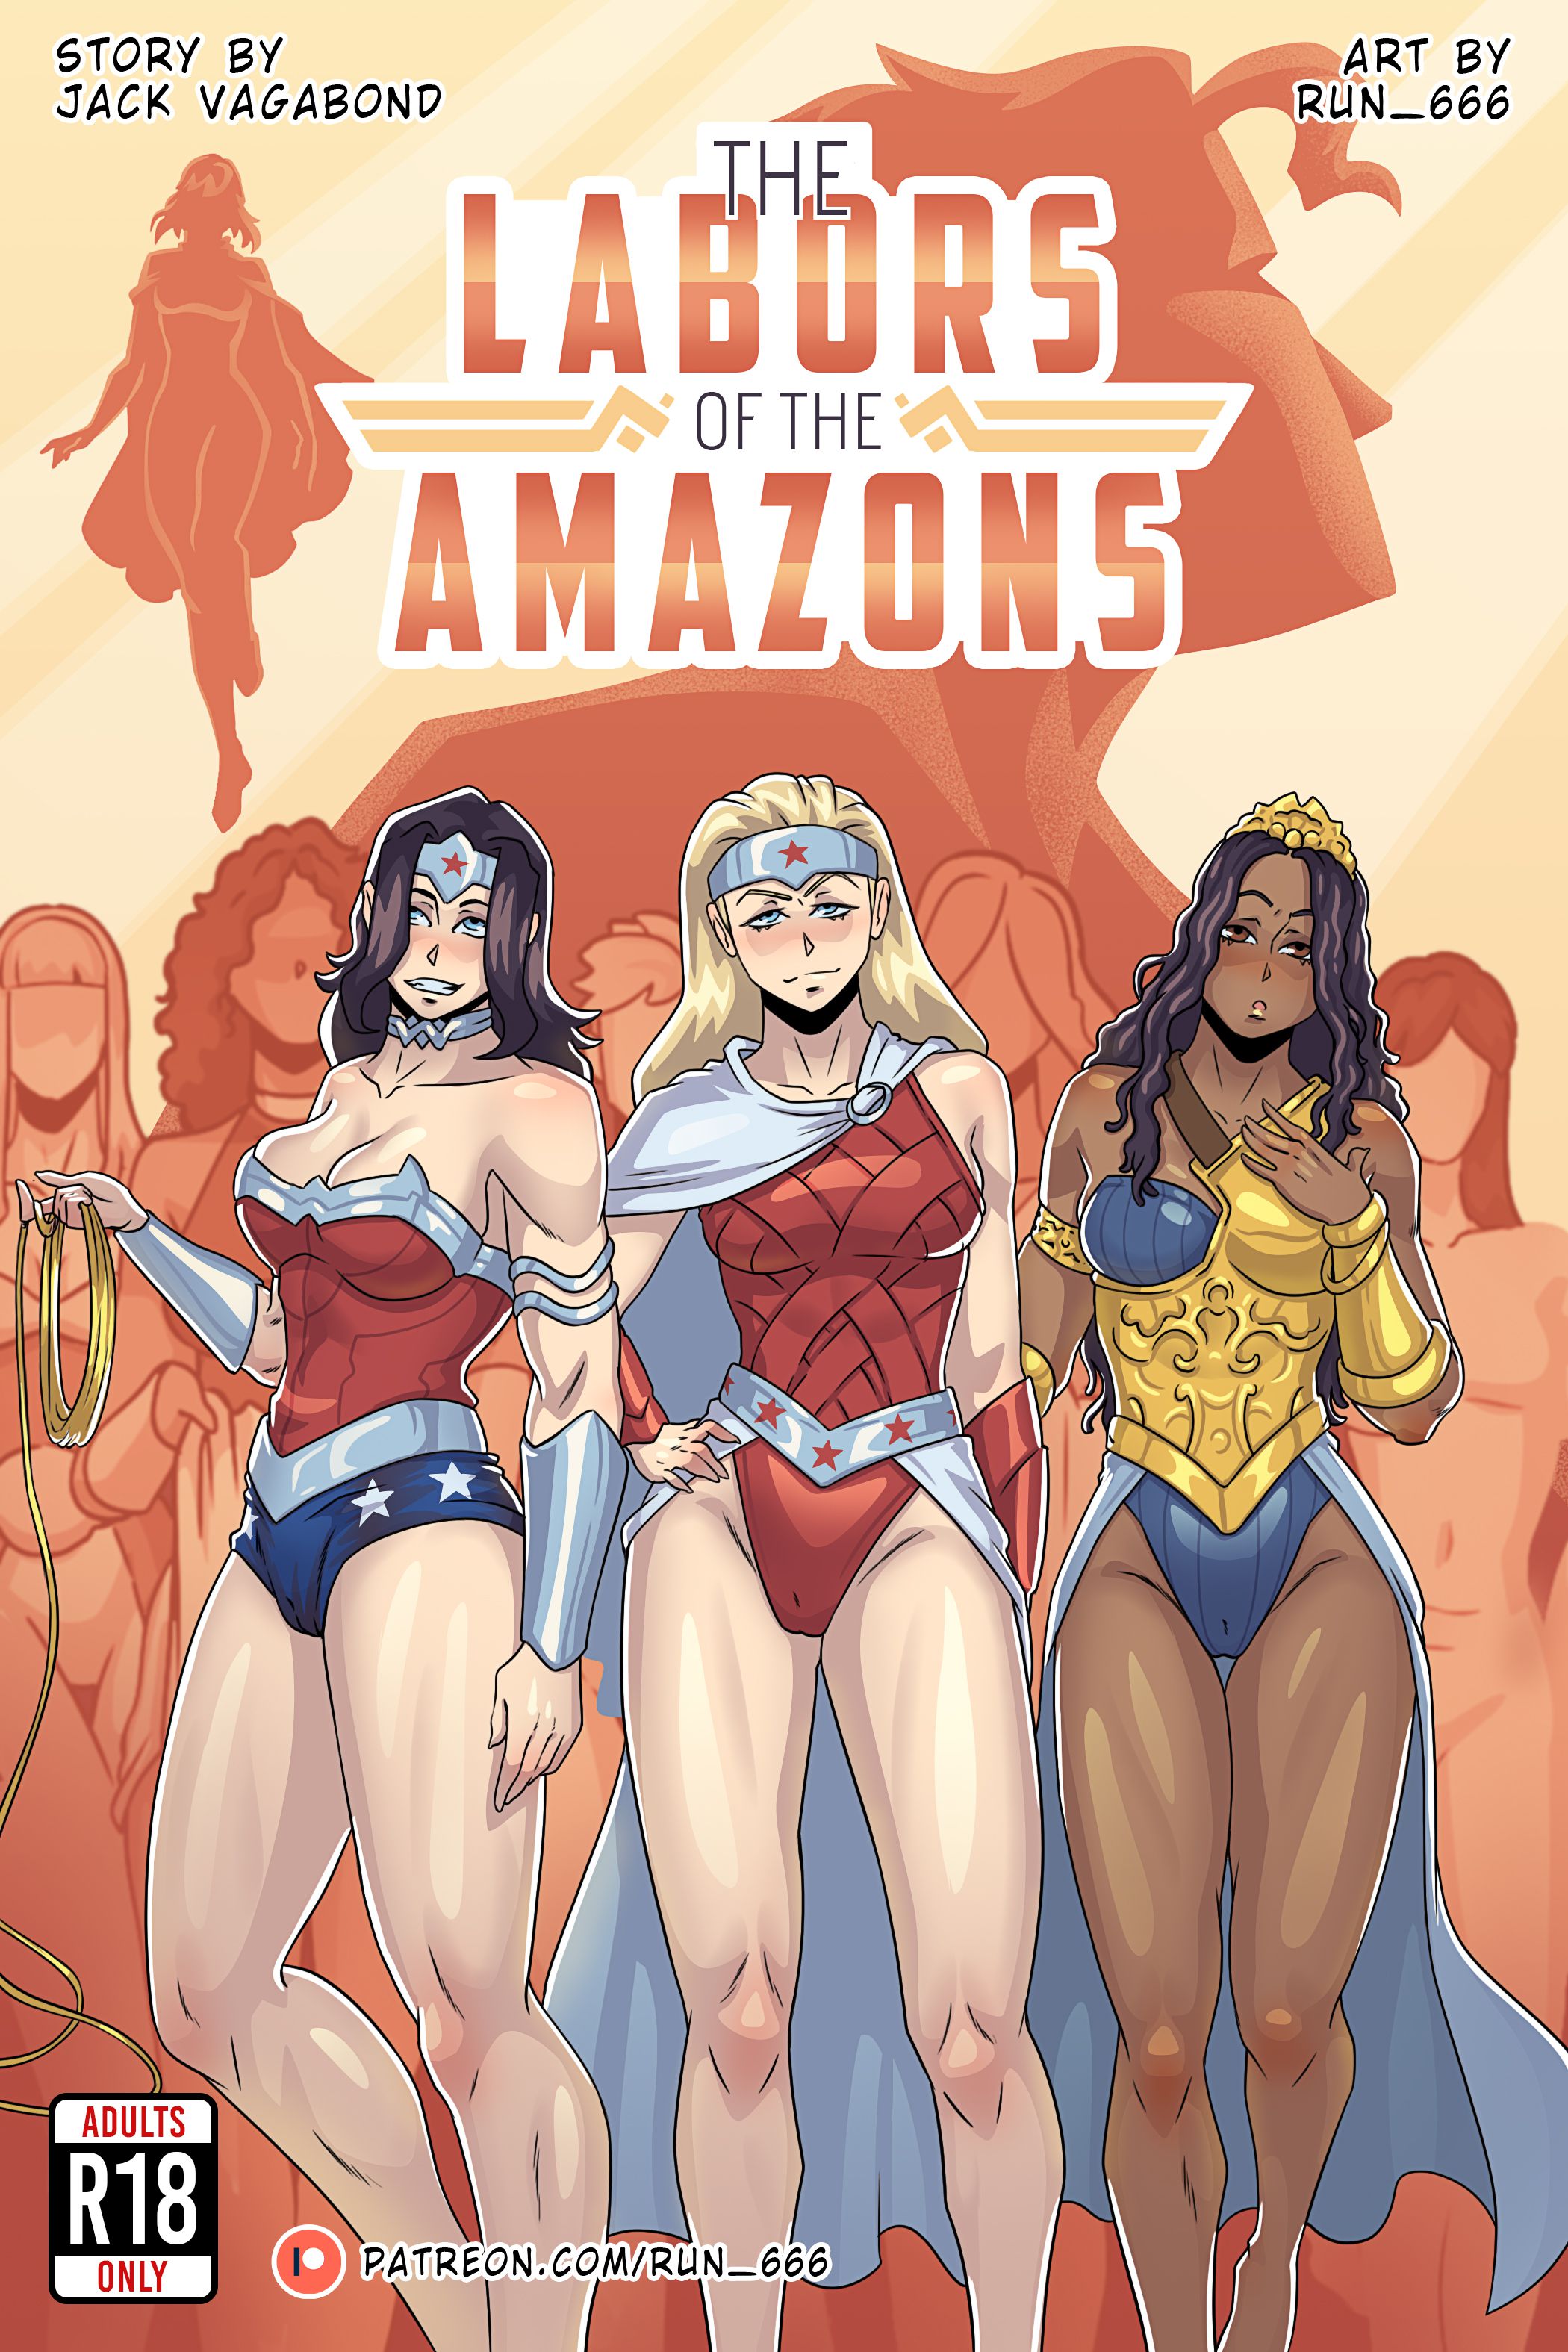 The Labors of the Amazons (Wonder Woman) Run 666 - 1  pic